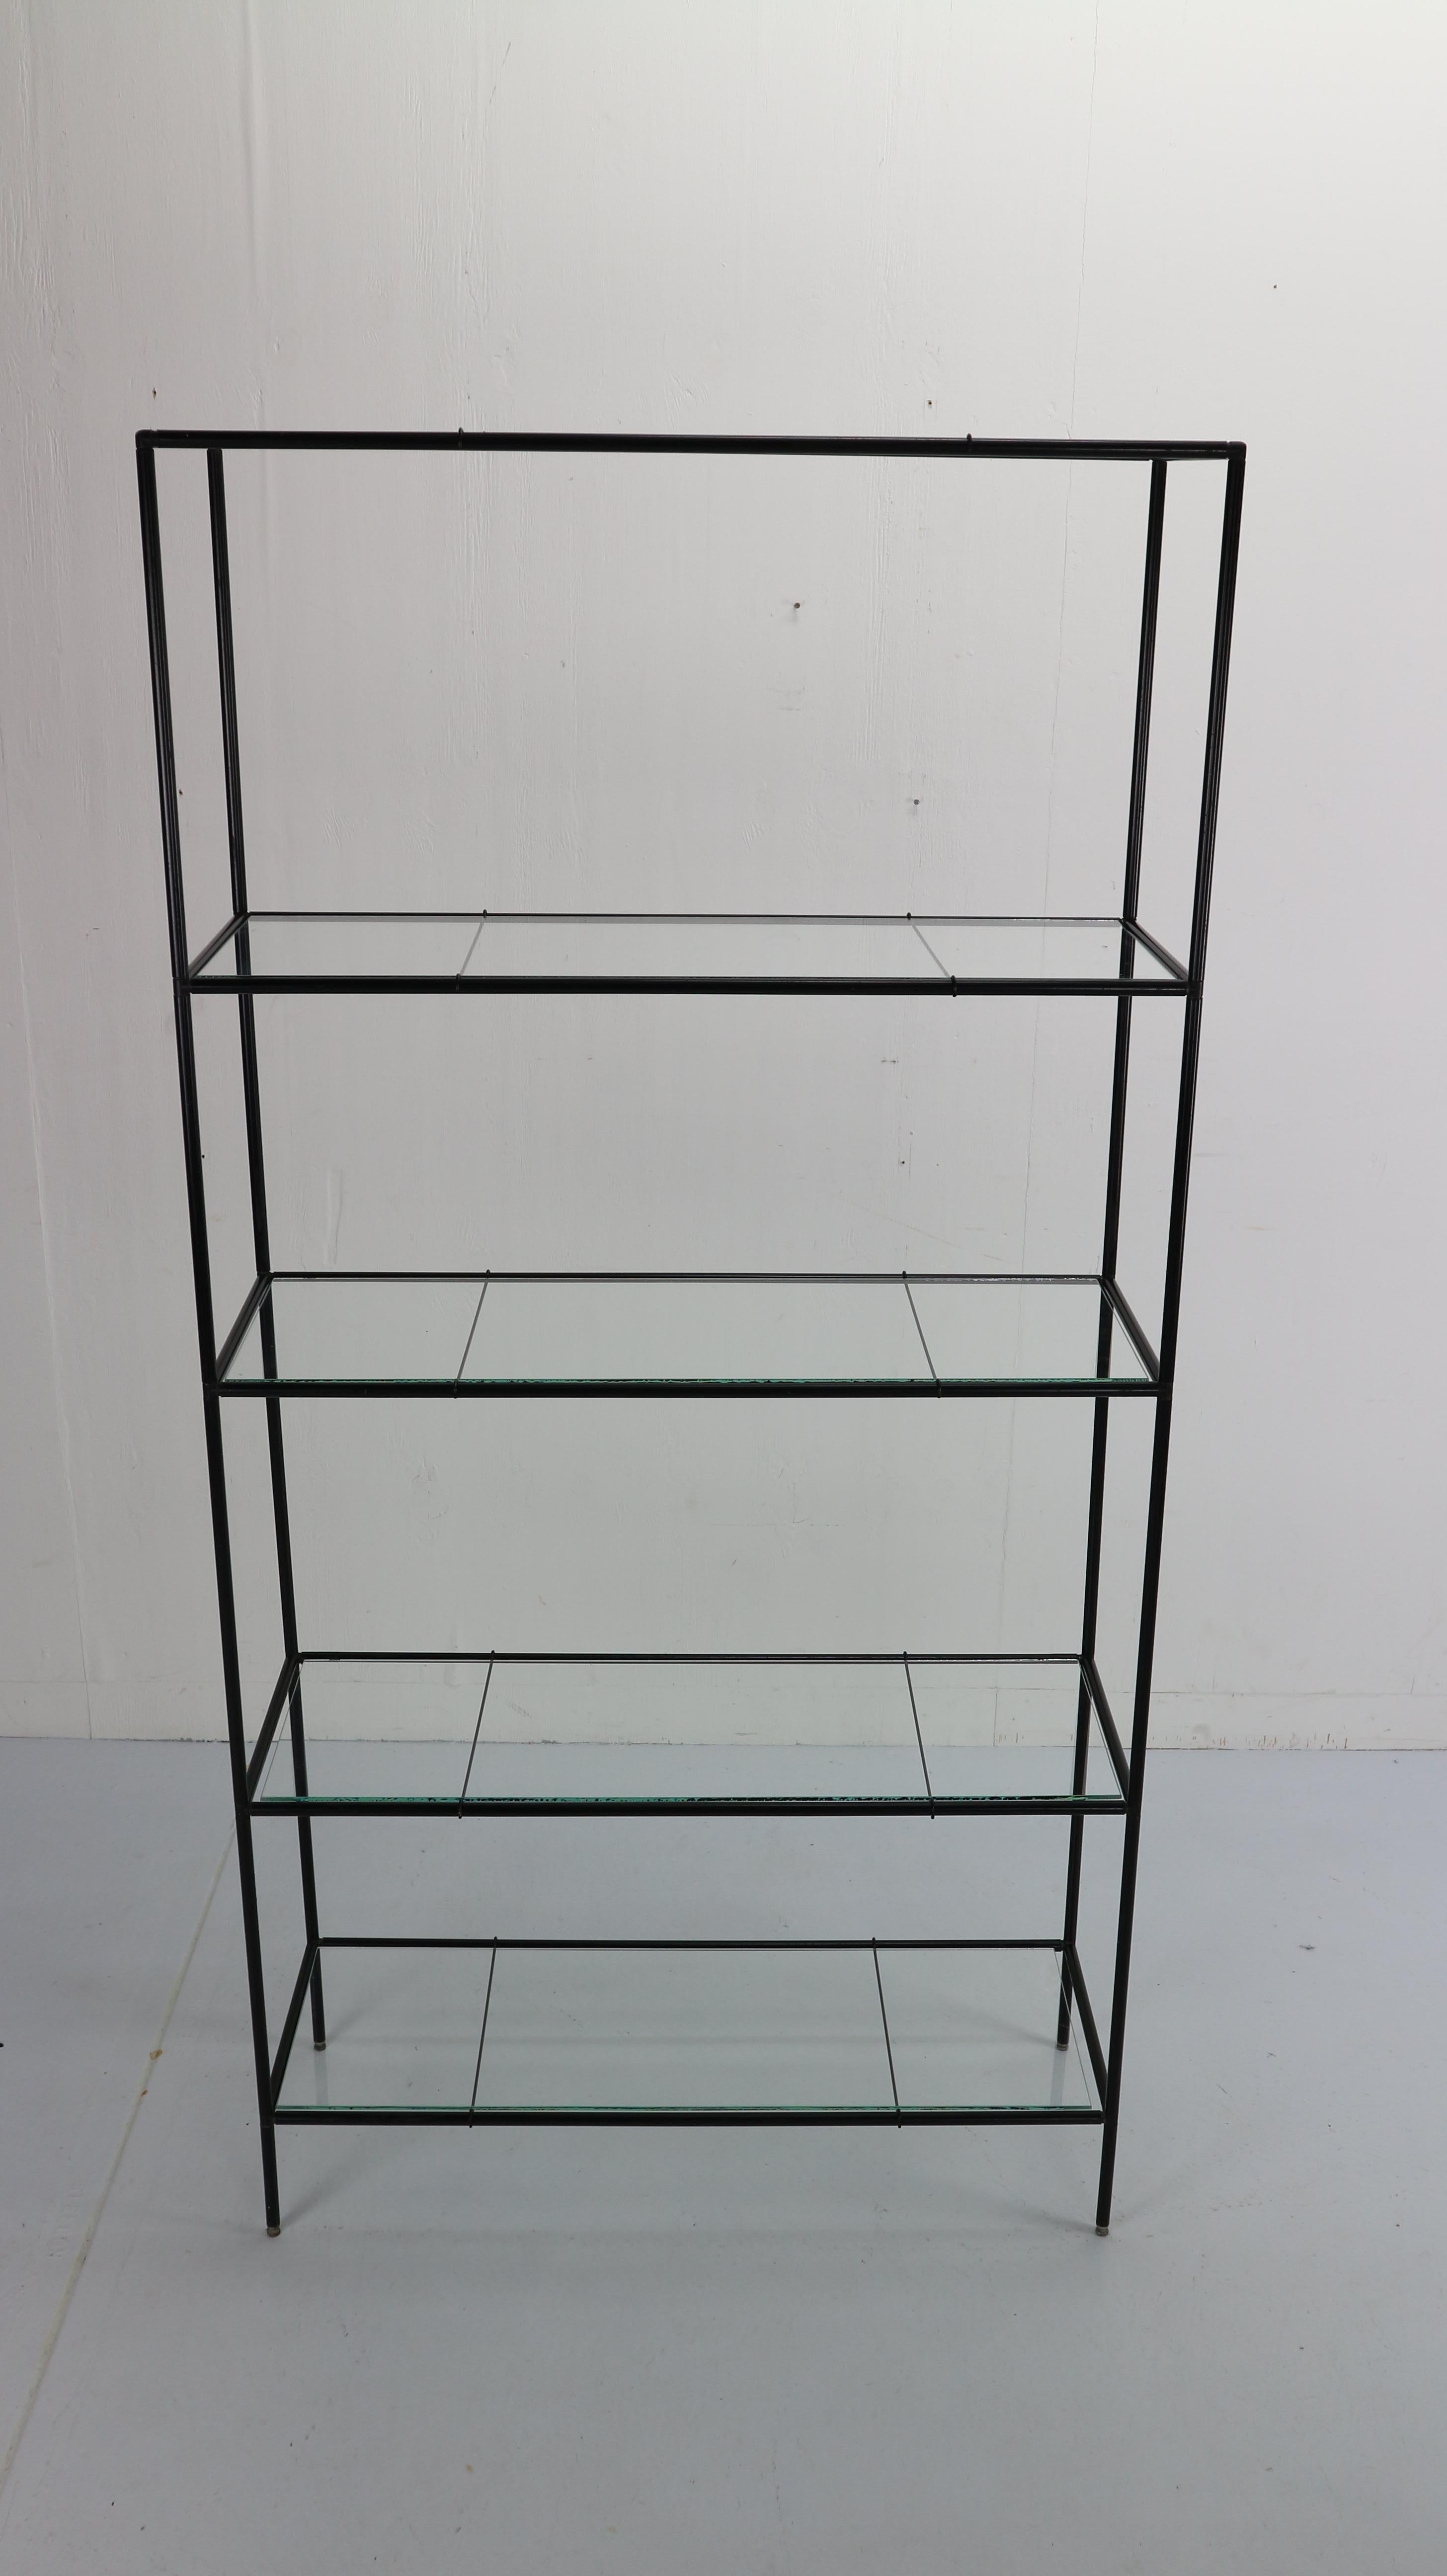 Minimalist shelving unit designed by and produced by Royal System, Denmark, circa 1960. This modular system exists of black metal tubes with connectors, floating glass shelves. 
We have more of abstracta shelving units see our other listings.